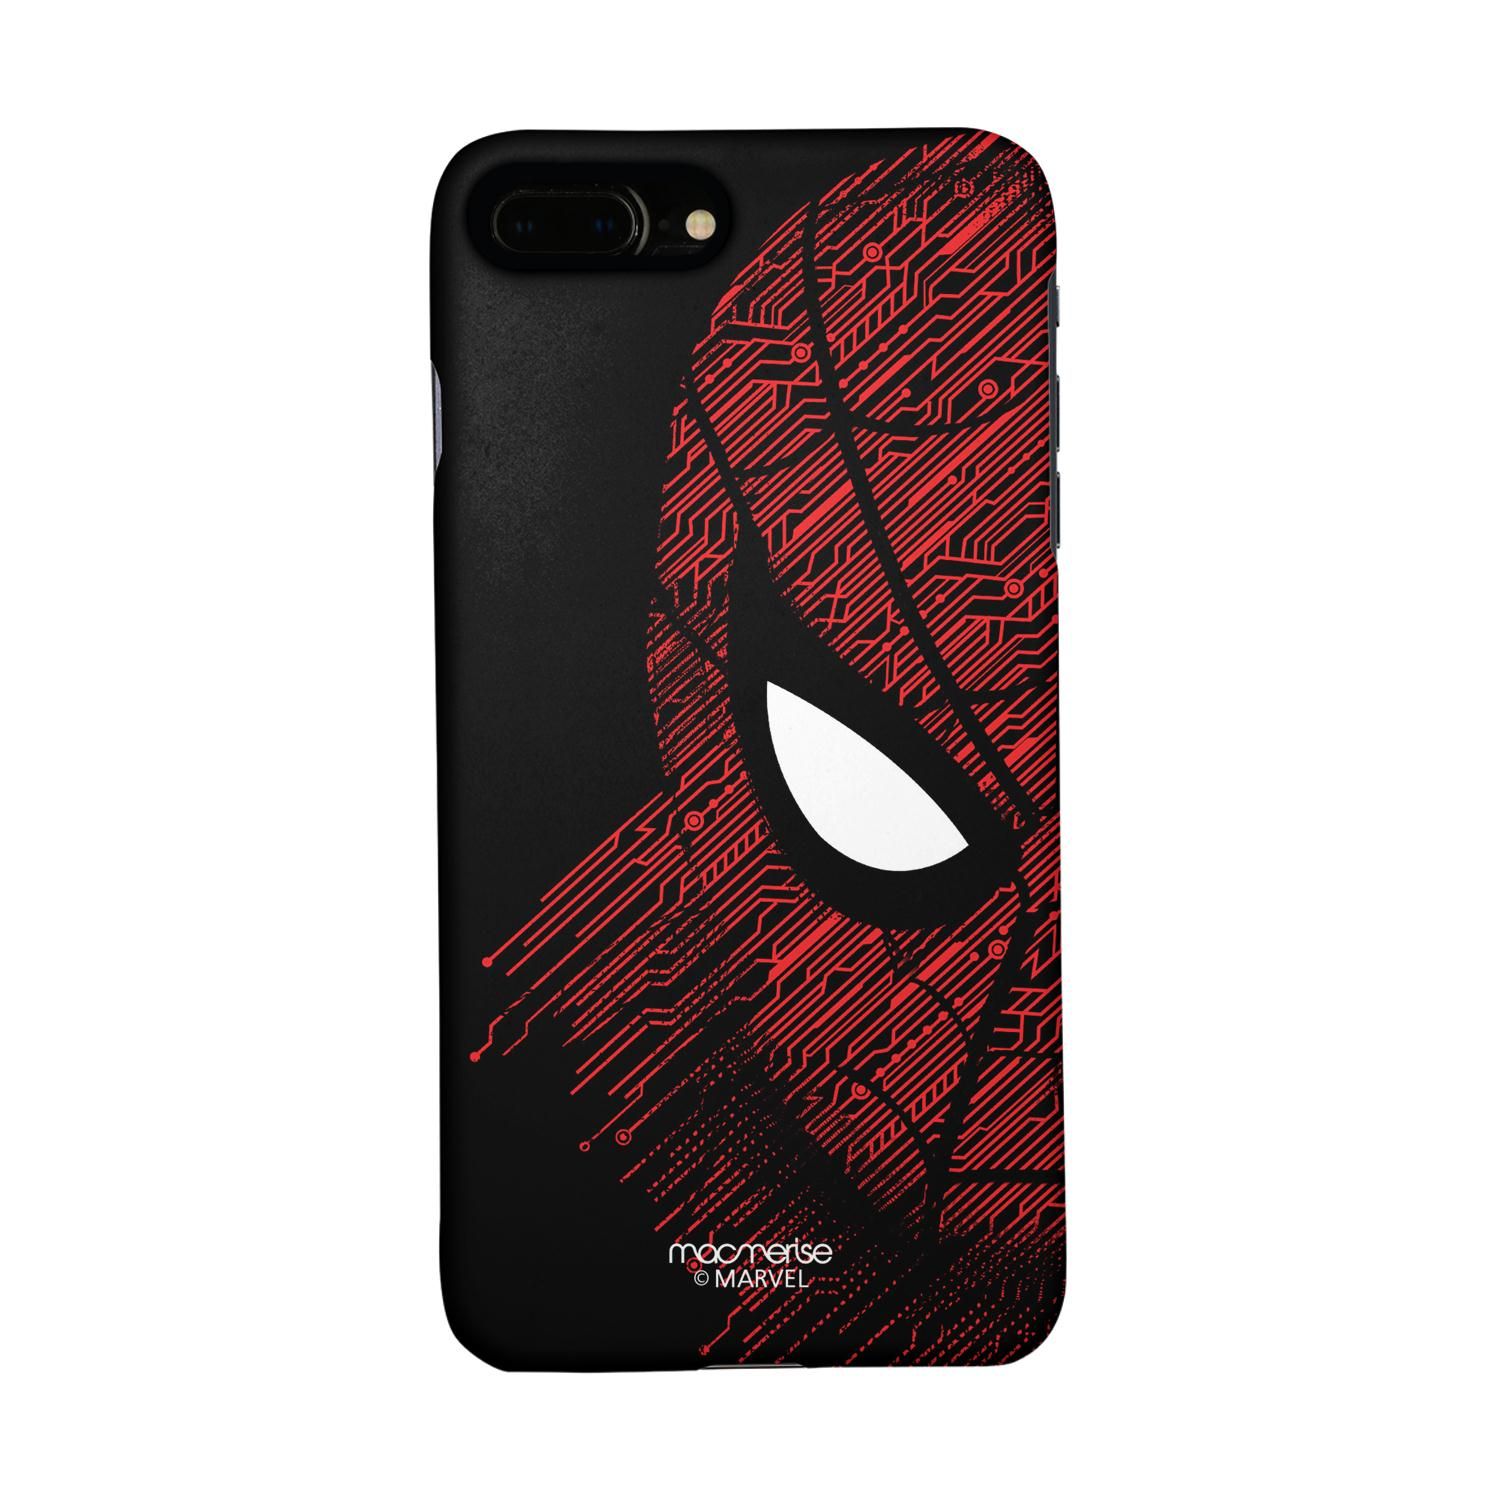 Buy Sketch Out Spiderman - Sleek Phone Case for iPhone 7 Plus Online